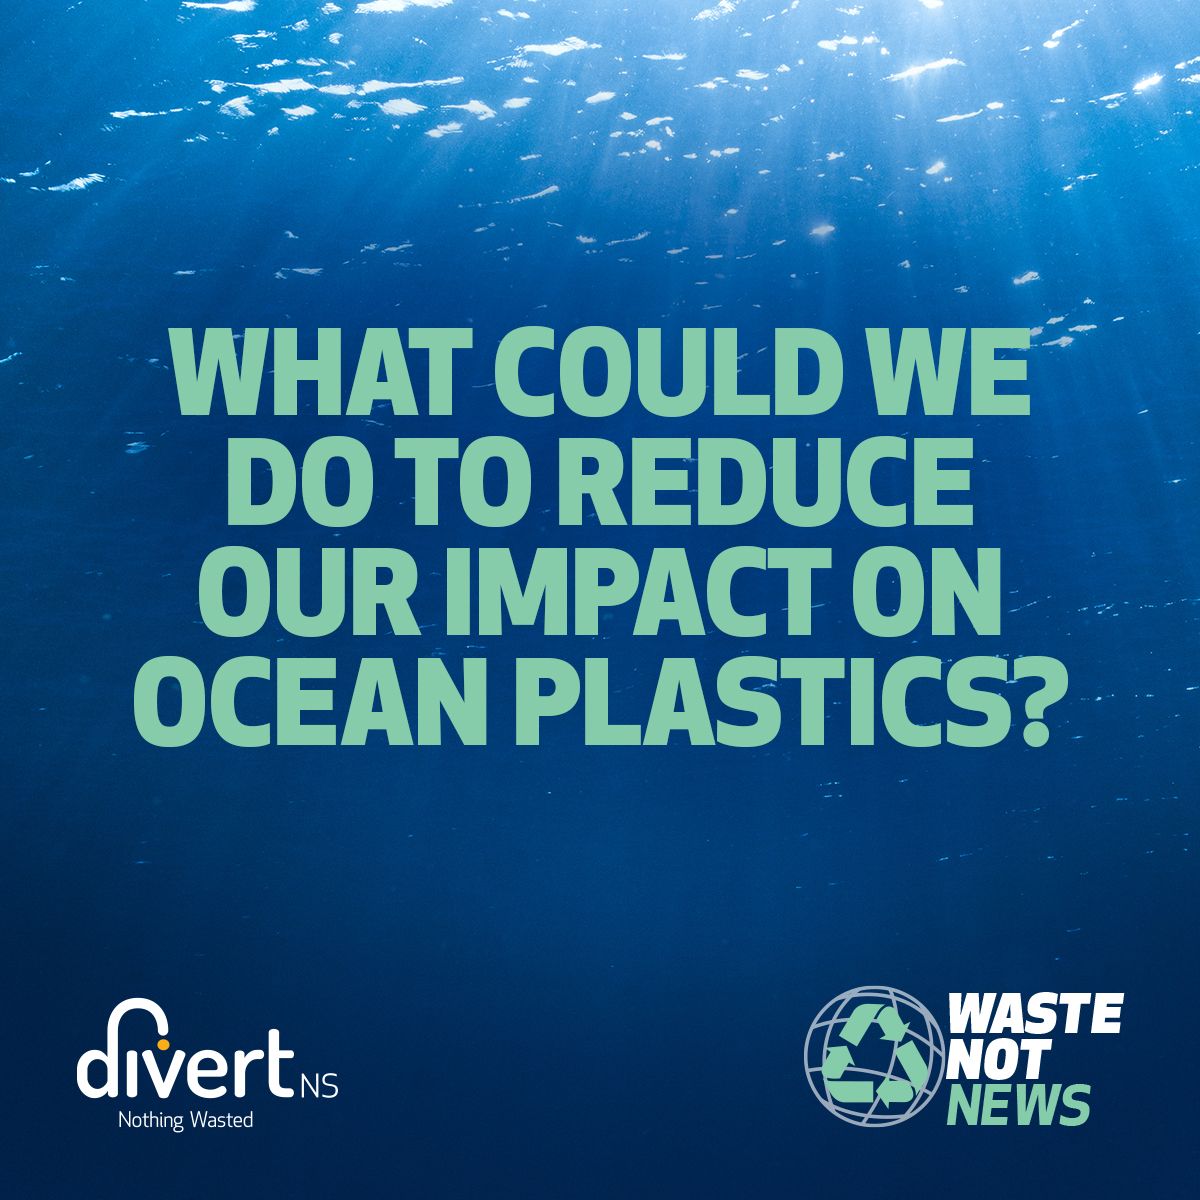 Did you know that any litter 50 km from a shoreline is considered ocean-bound and up to 8 million tonnes of plastic enter the ocean each year? Ask your students how they can find ways to reduce ocean plastics. Check out our free educational resources at divertns.ca/learn